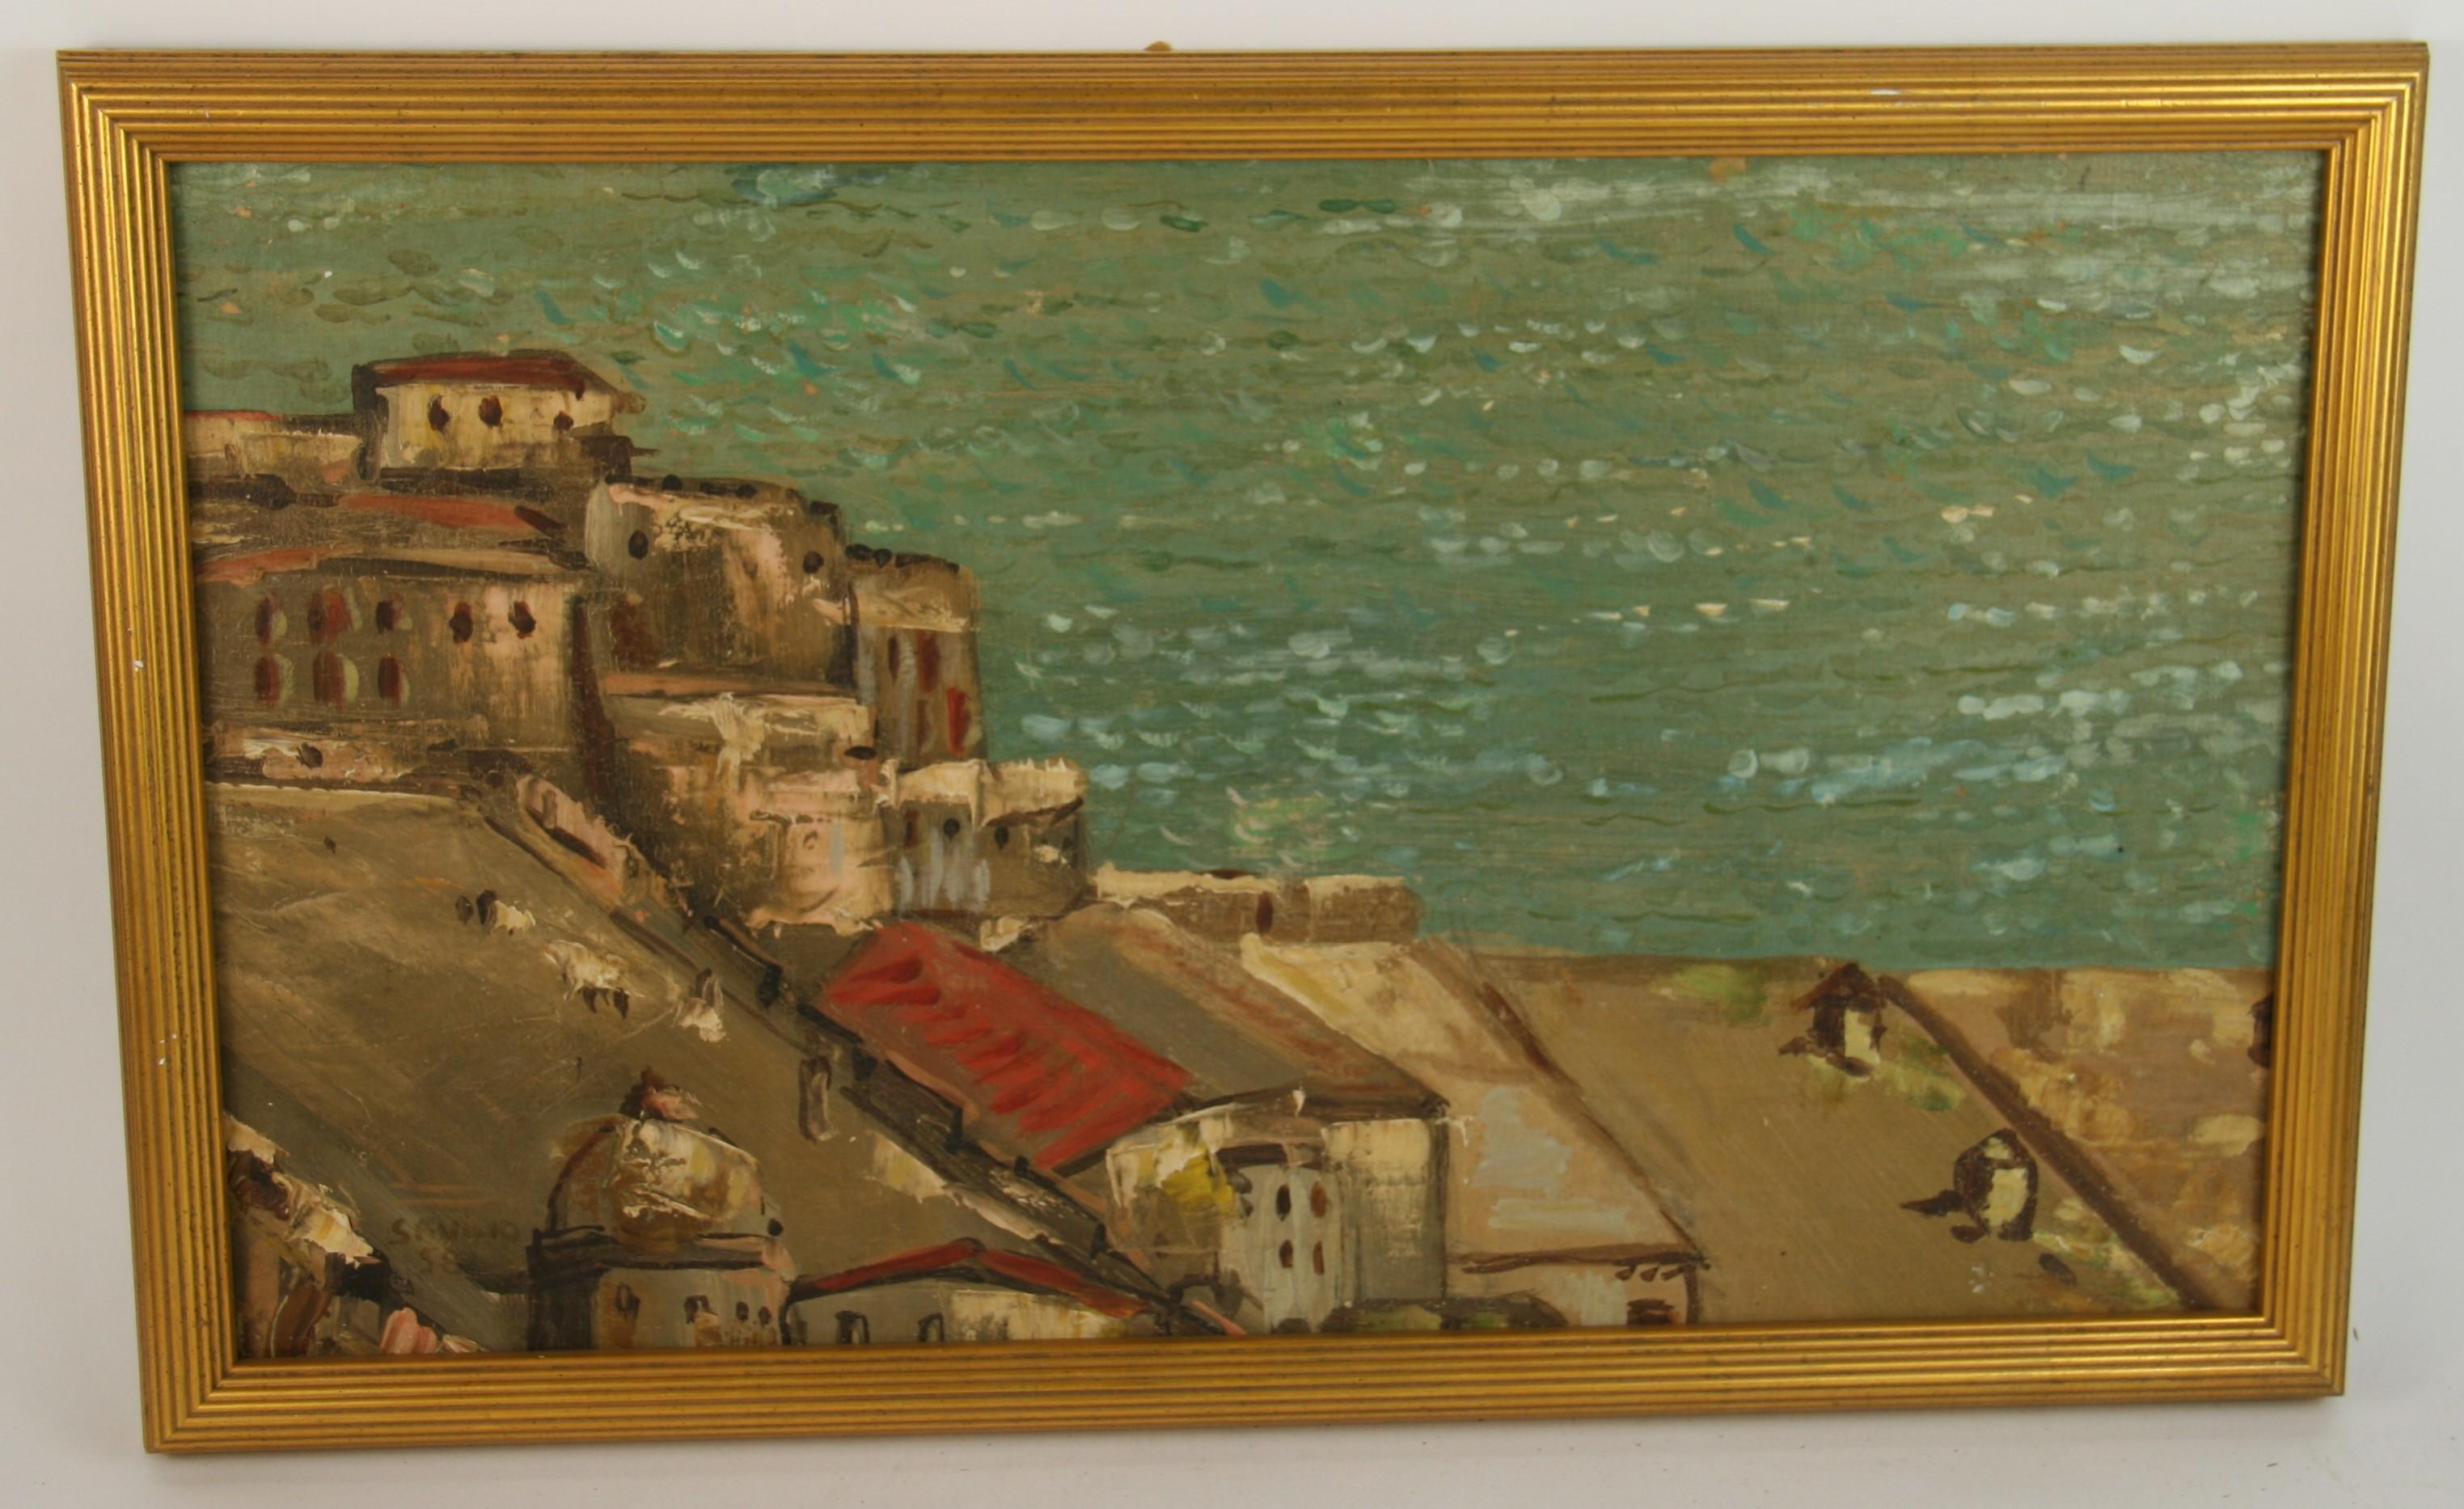 3779 Oil on canvas applied to board
Set in a custom gilt wood frame
Signed Savino 58